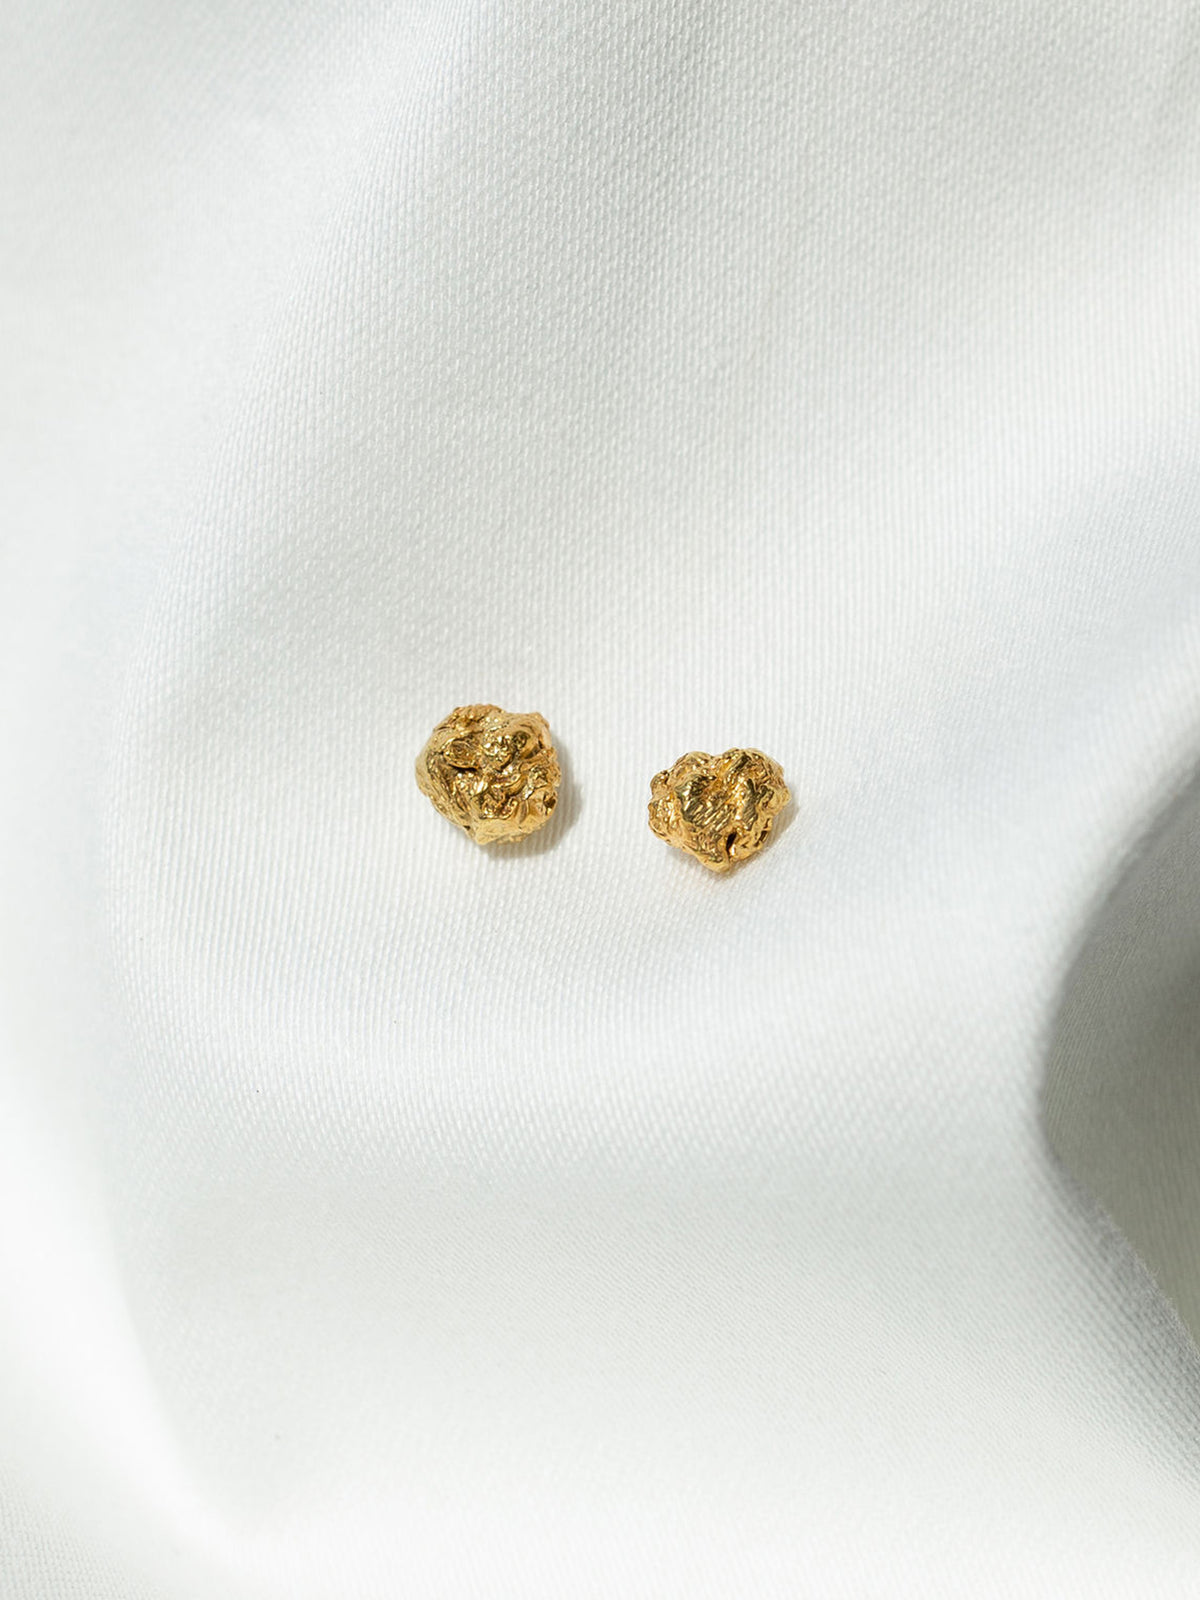 Archaic Stud Earrings 14ct Gold